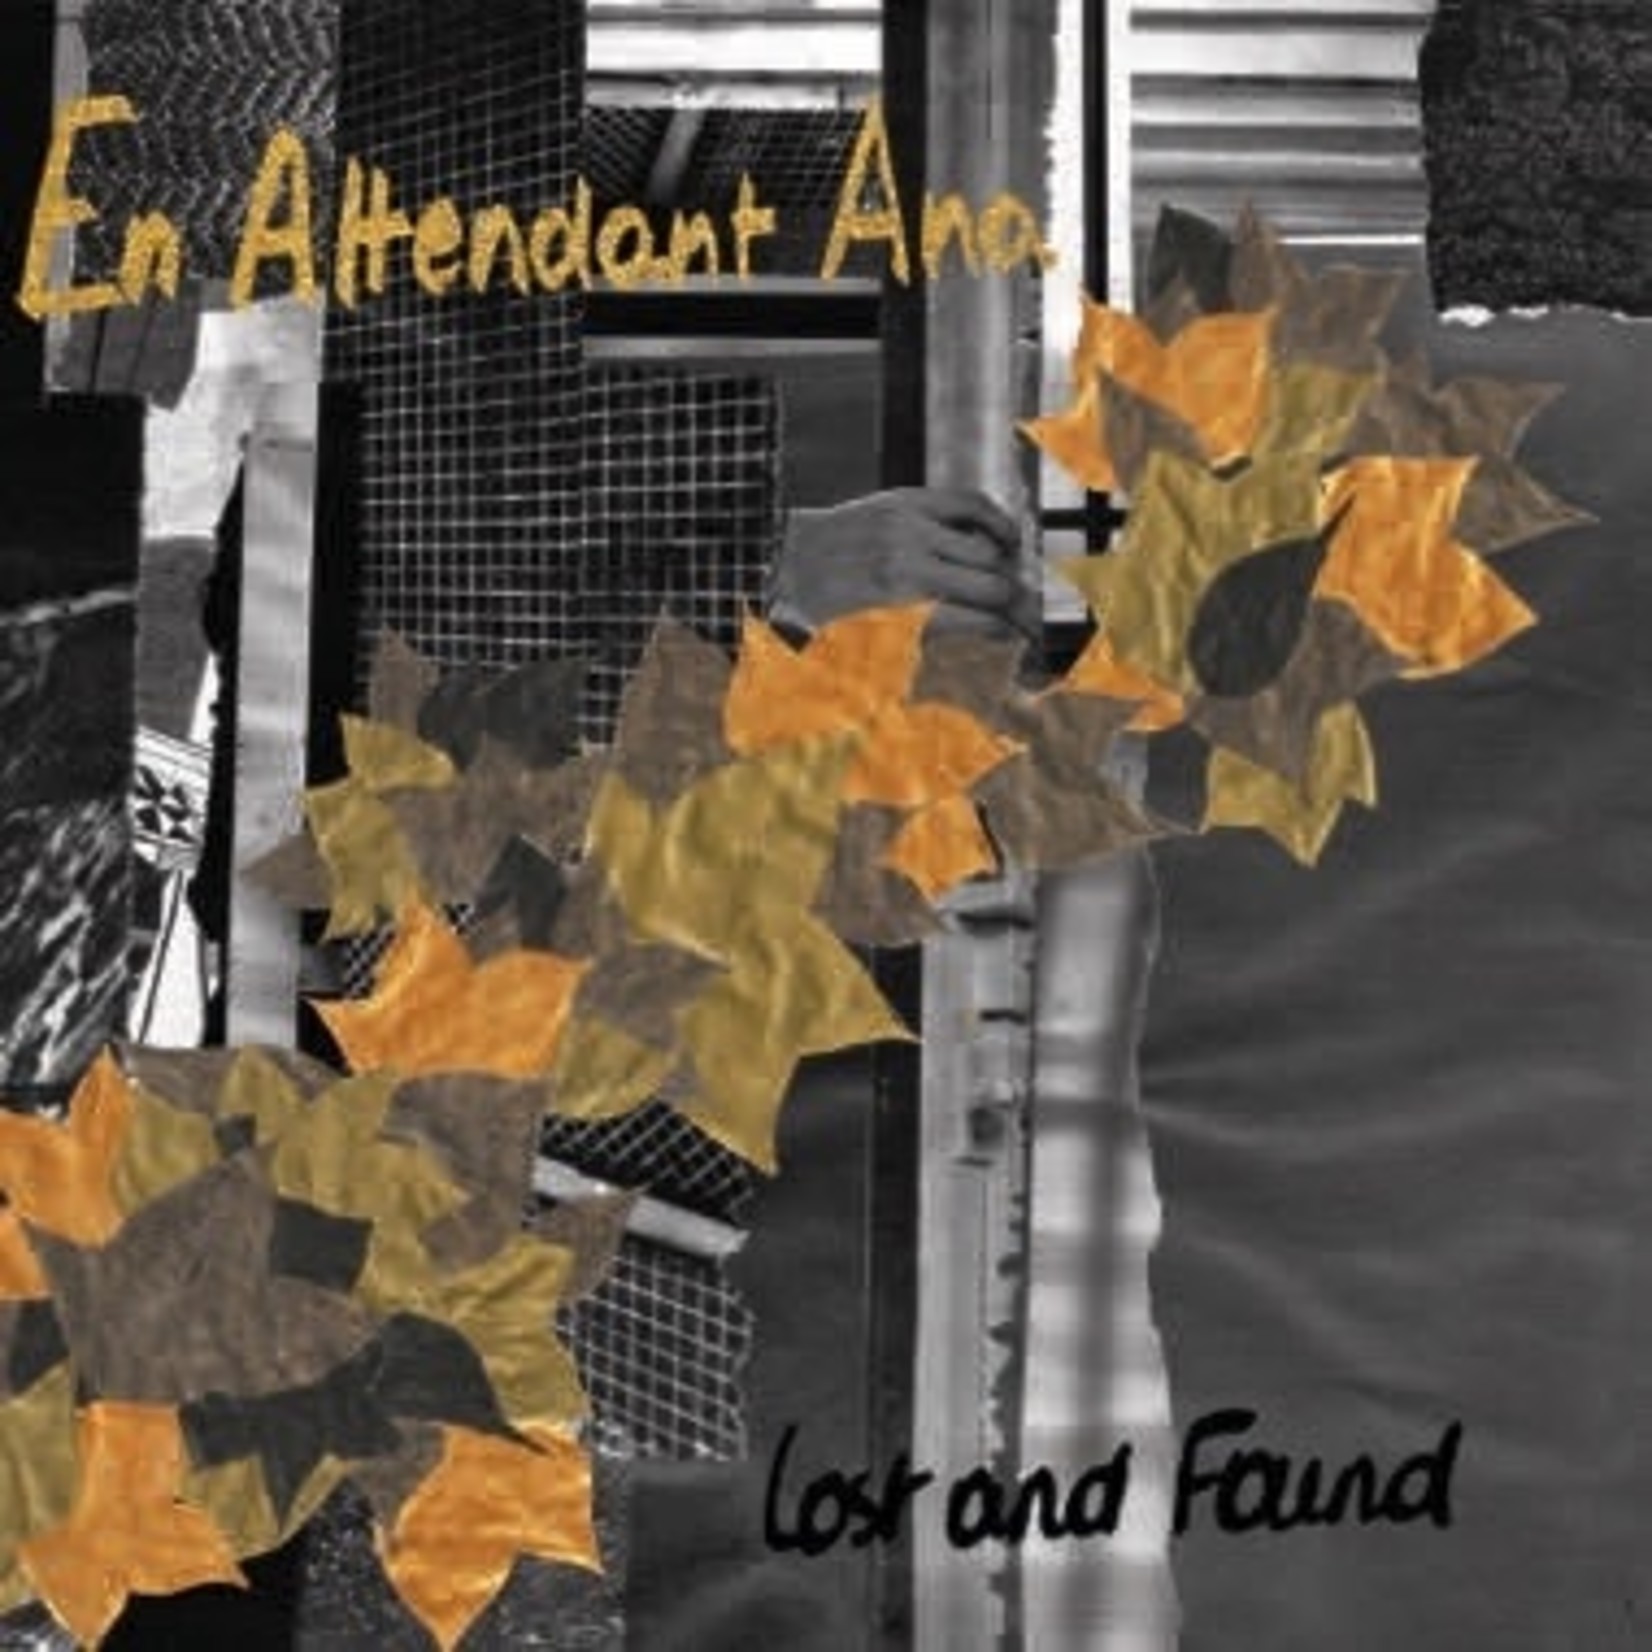 Trouble In Mind En Attendant Ana - Lost and Found (LP) [Sunset Orange]